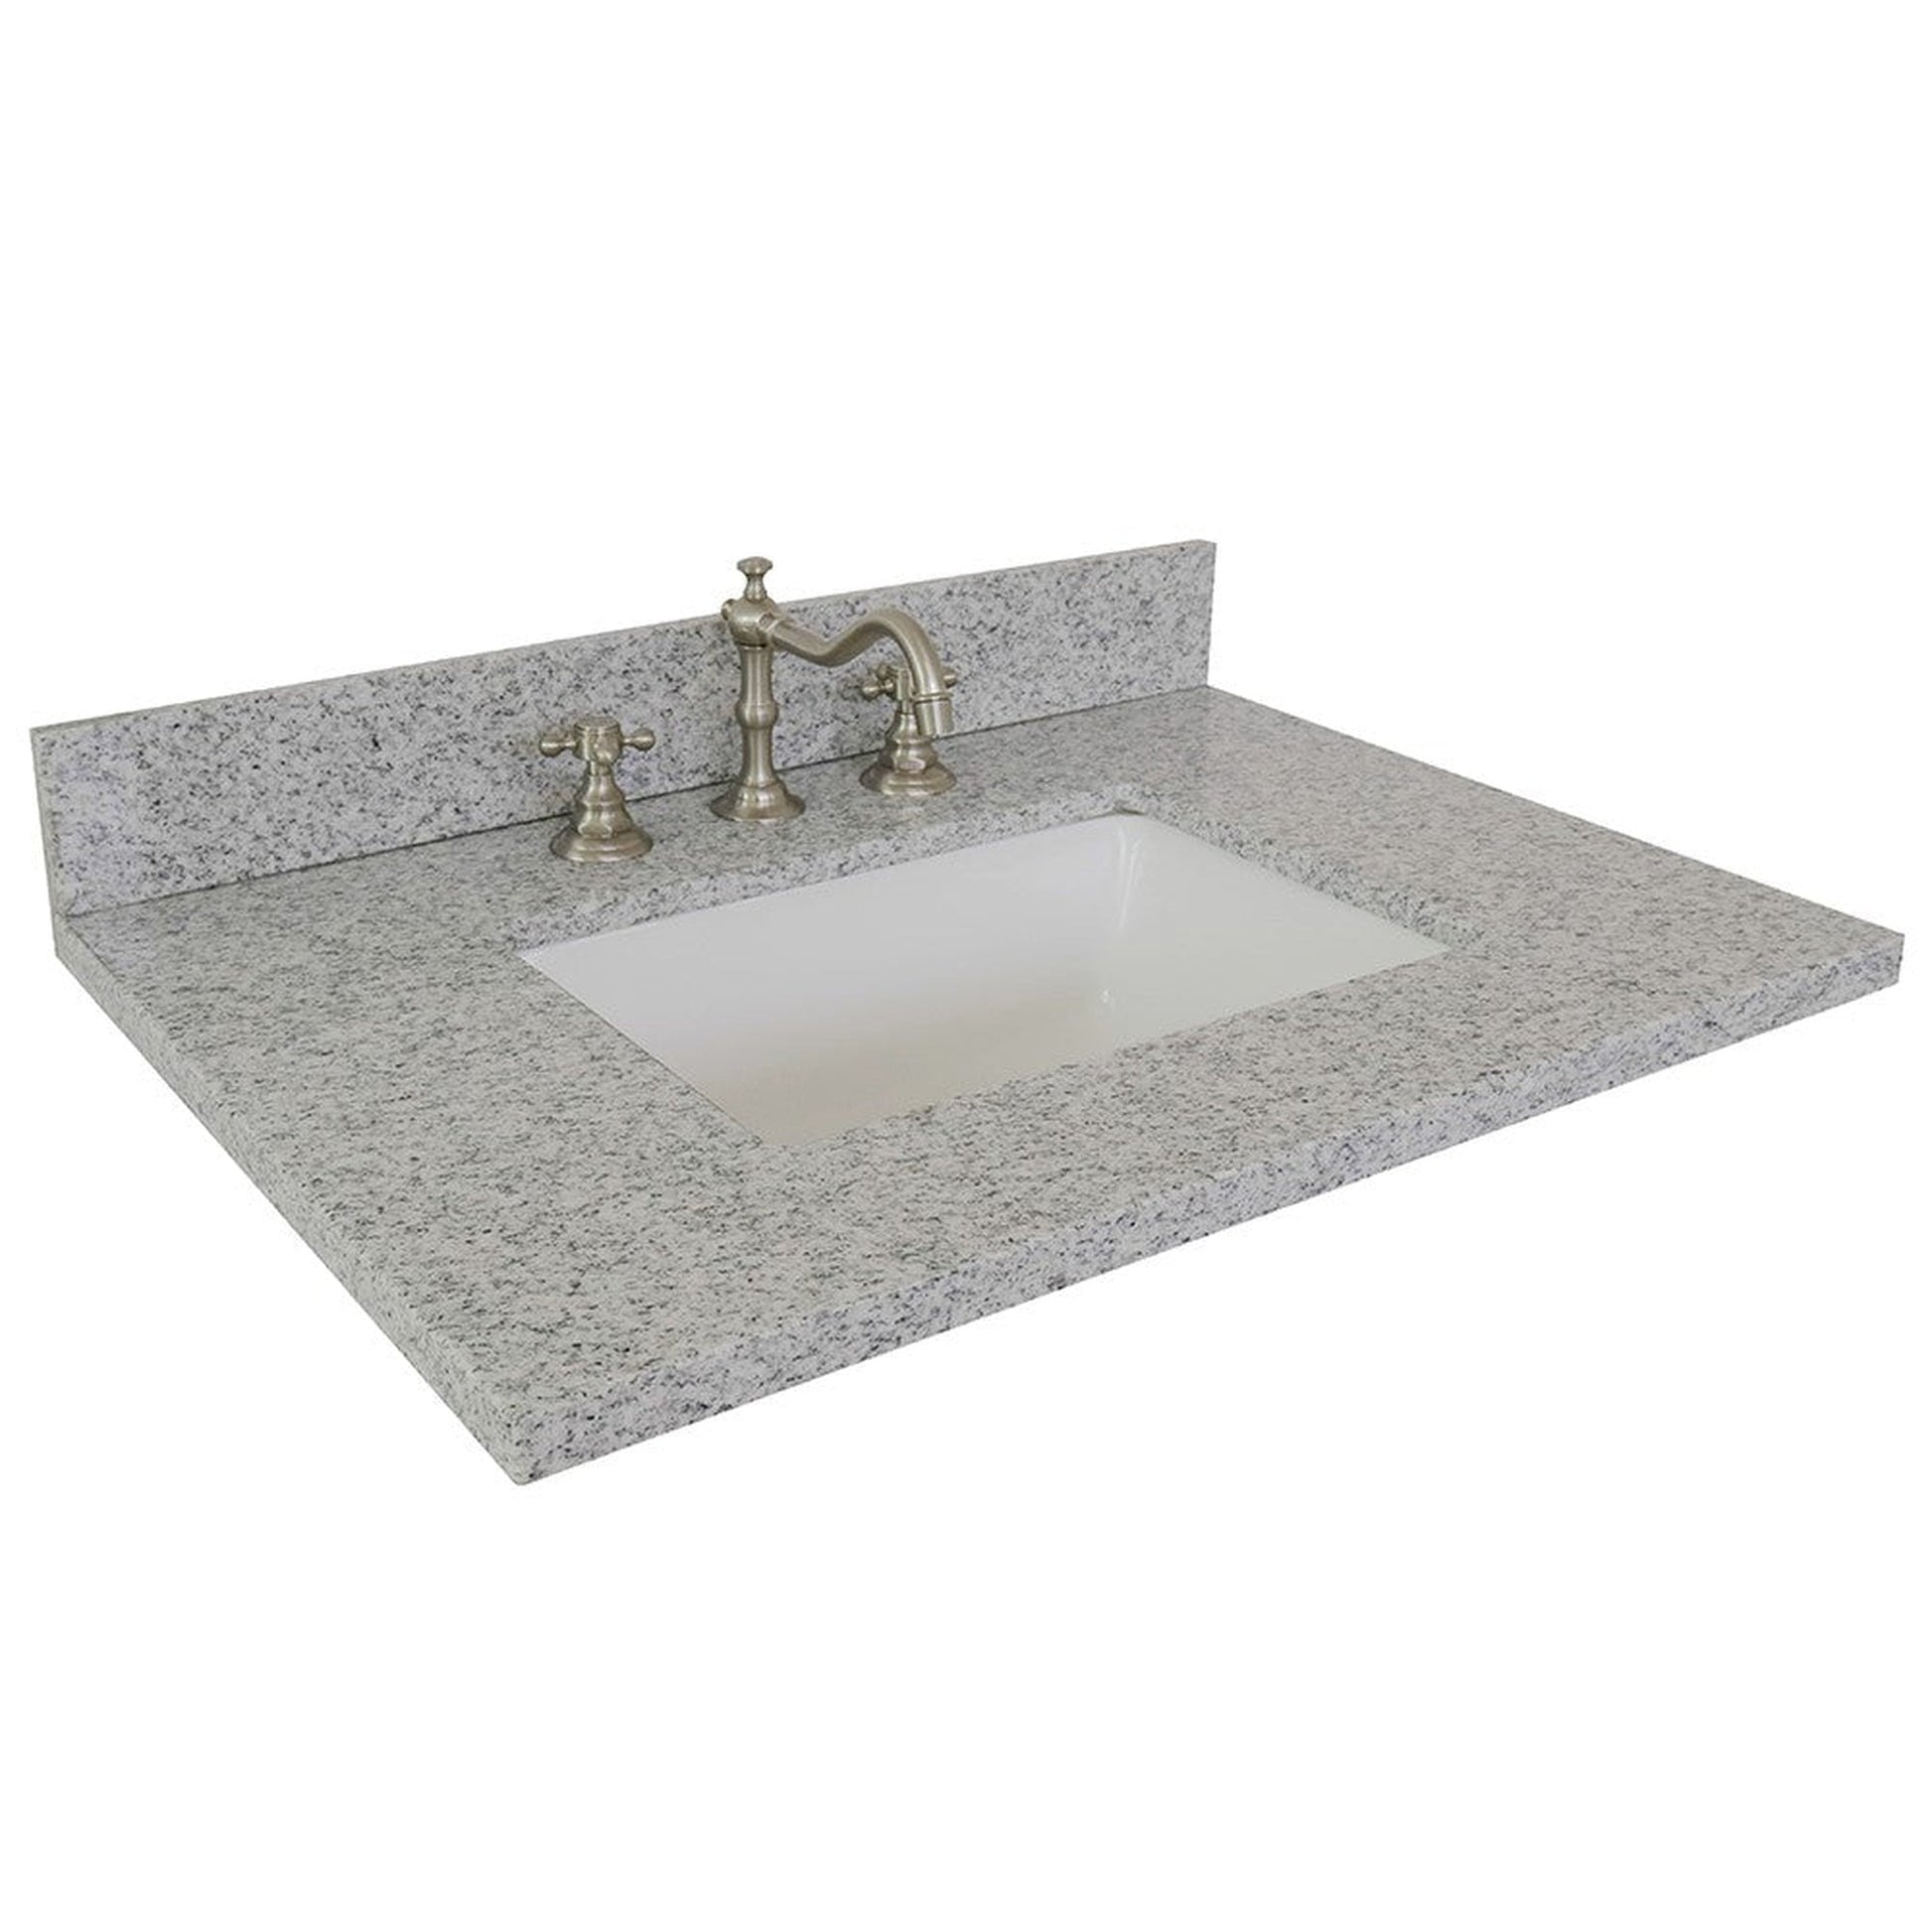 Bellaterra Home 31" x 22" Gray Granite Three Hole Vanity Top With Undermount Rectangular Sink and Overflow